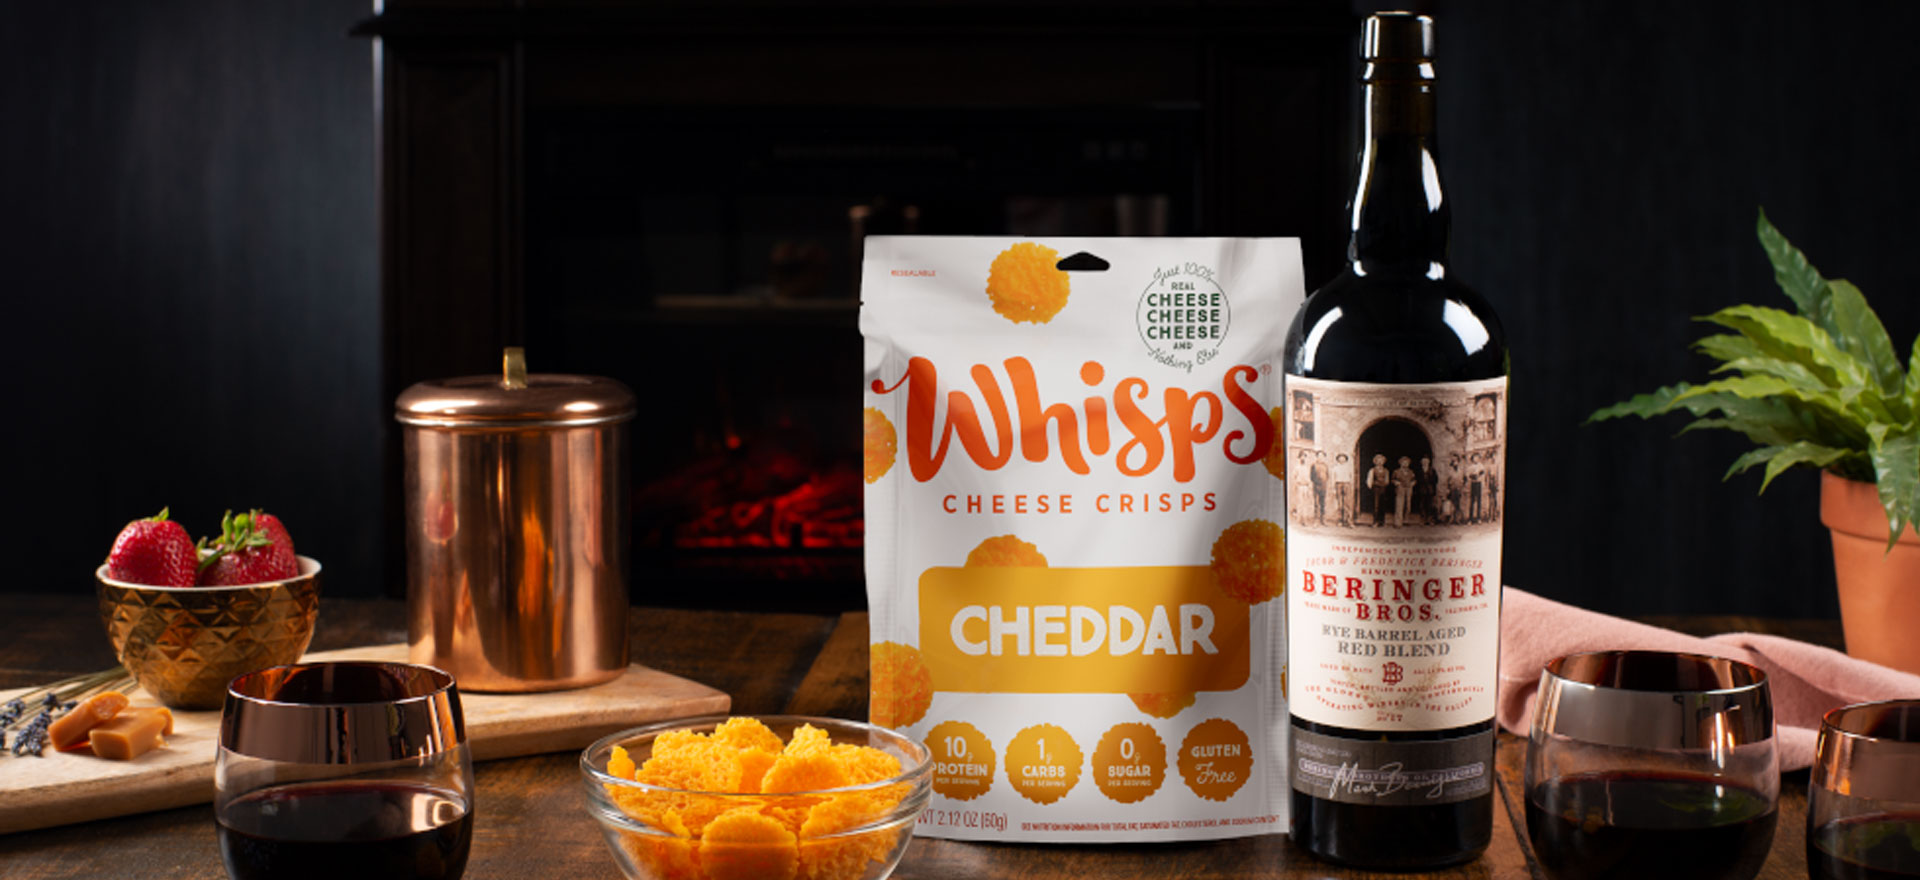 Beringer Bros. Wines and Whisps Cheese Crisps